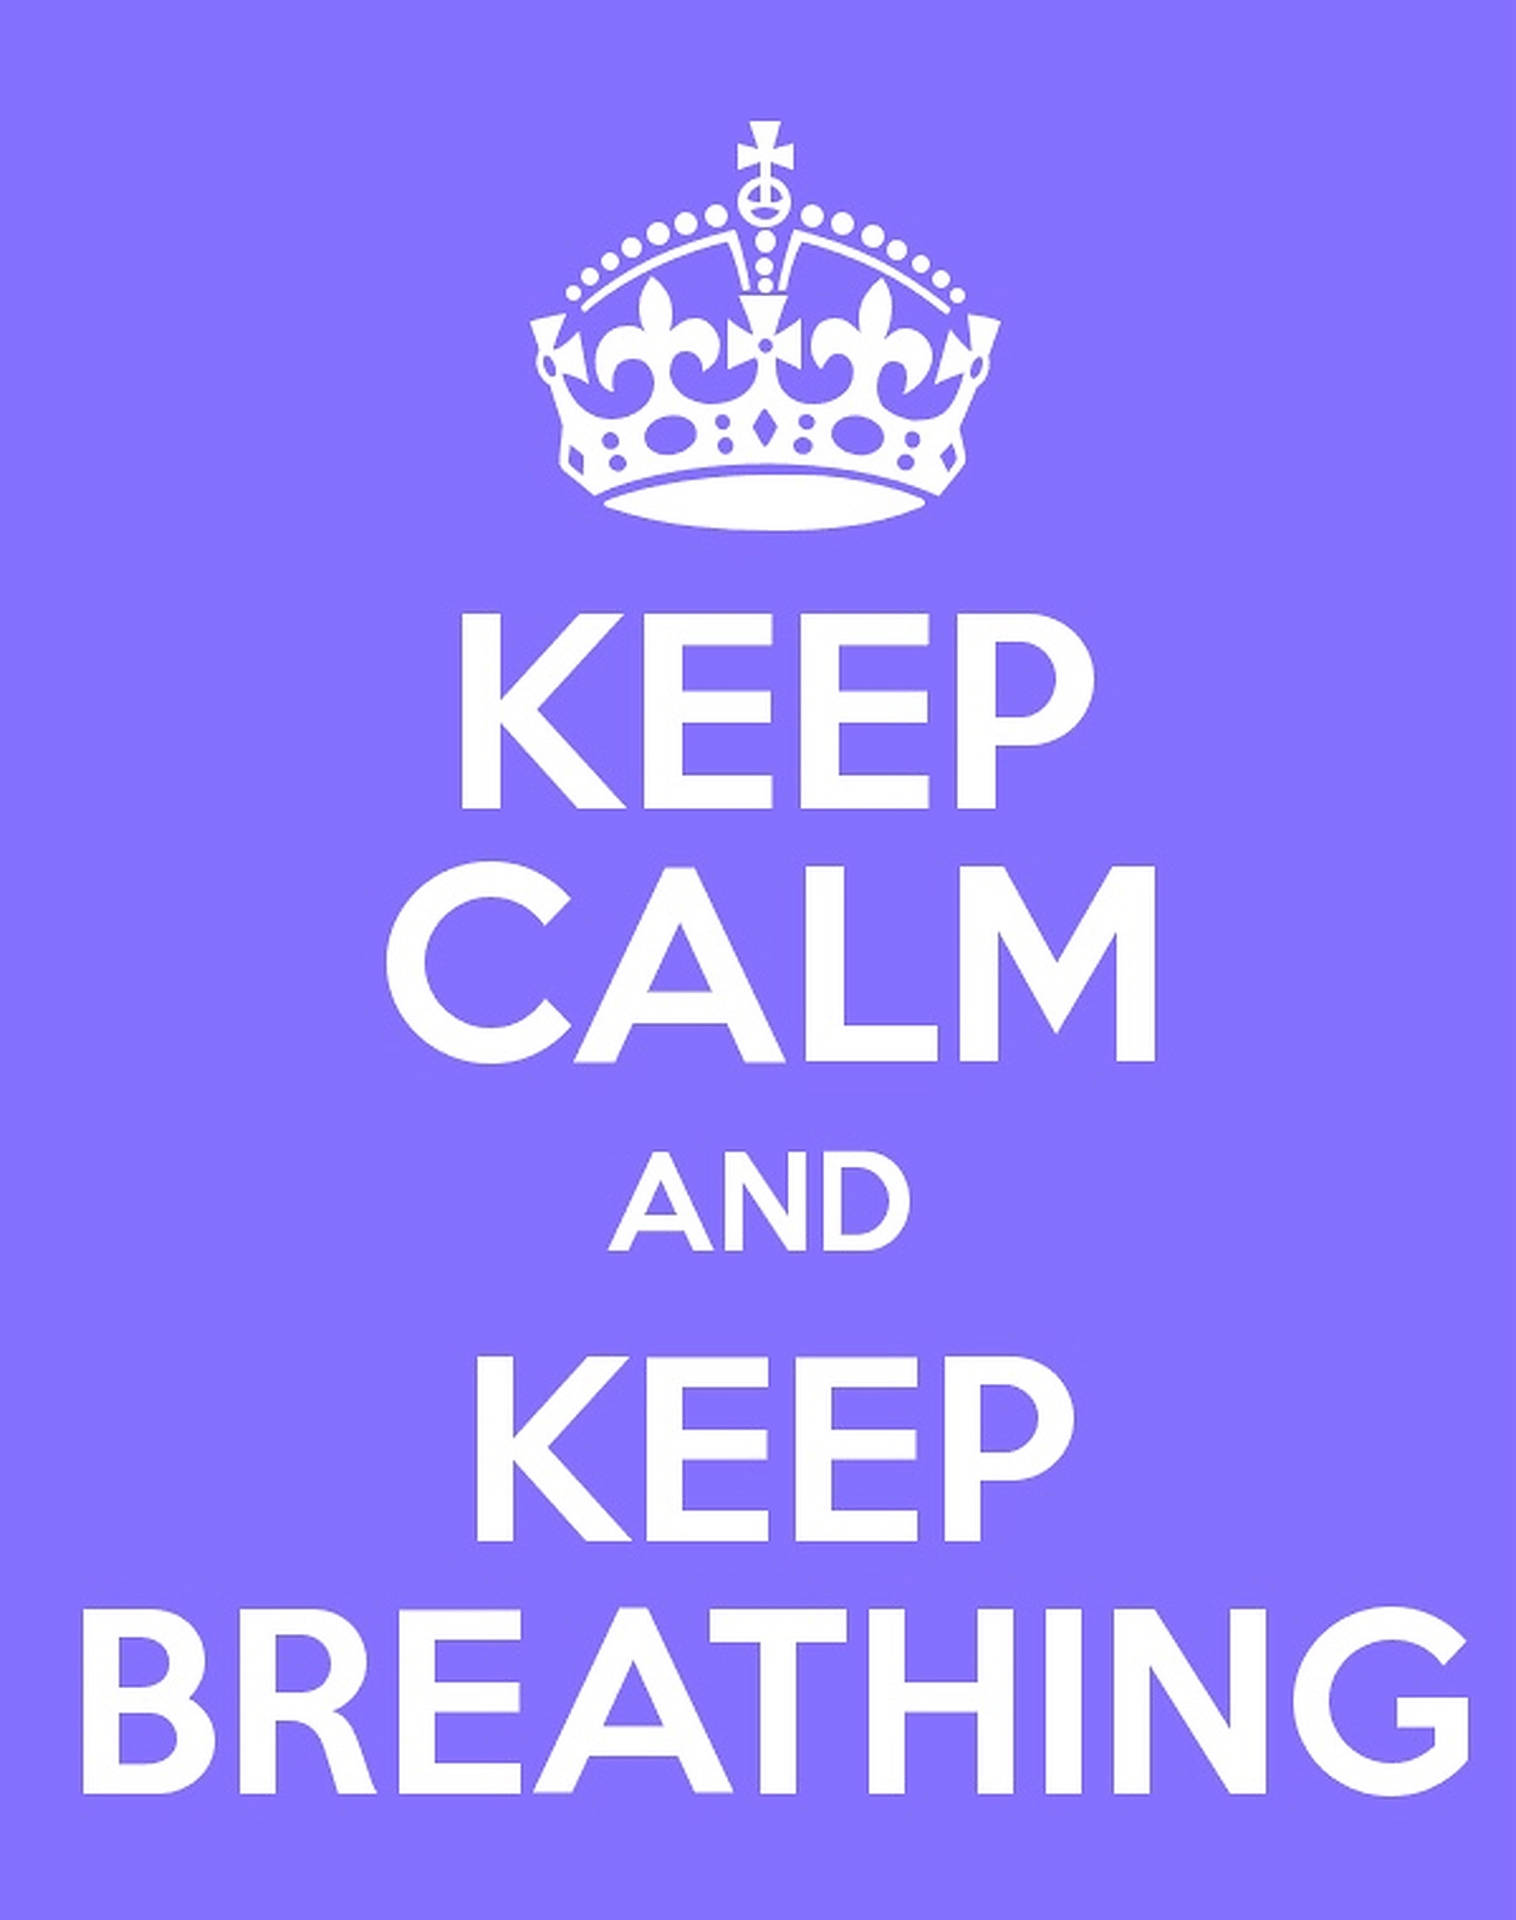 Free Breathing Wallpaper Downloads, [100+] Breathing Wallpapers for FREE |  